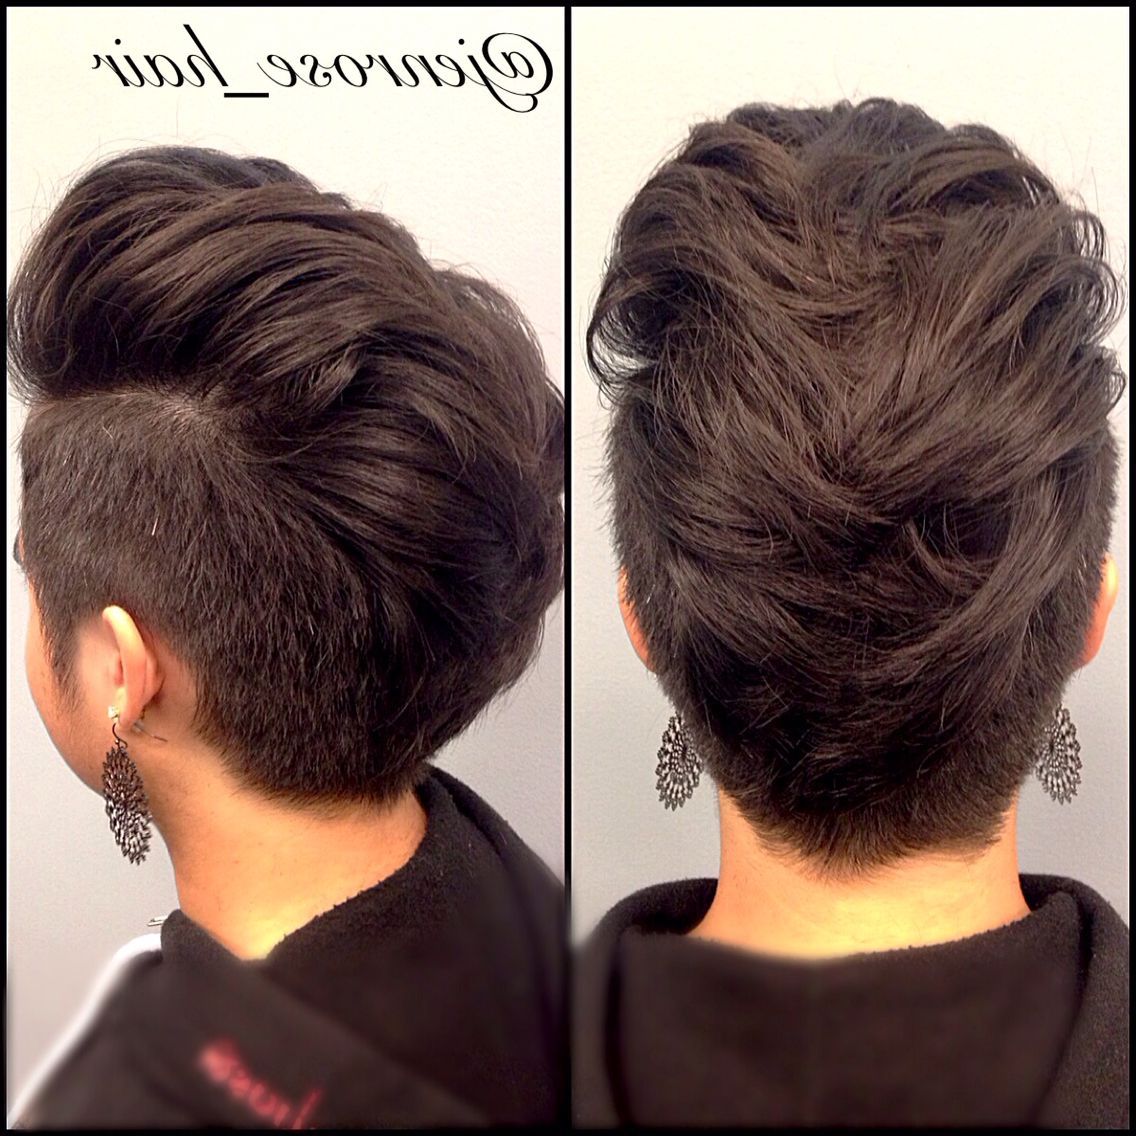 Women's Faux Hawk With Shaved Sides. Shorts Women's Hair Cut (View 15 of 20)